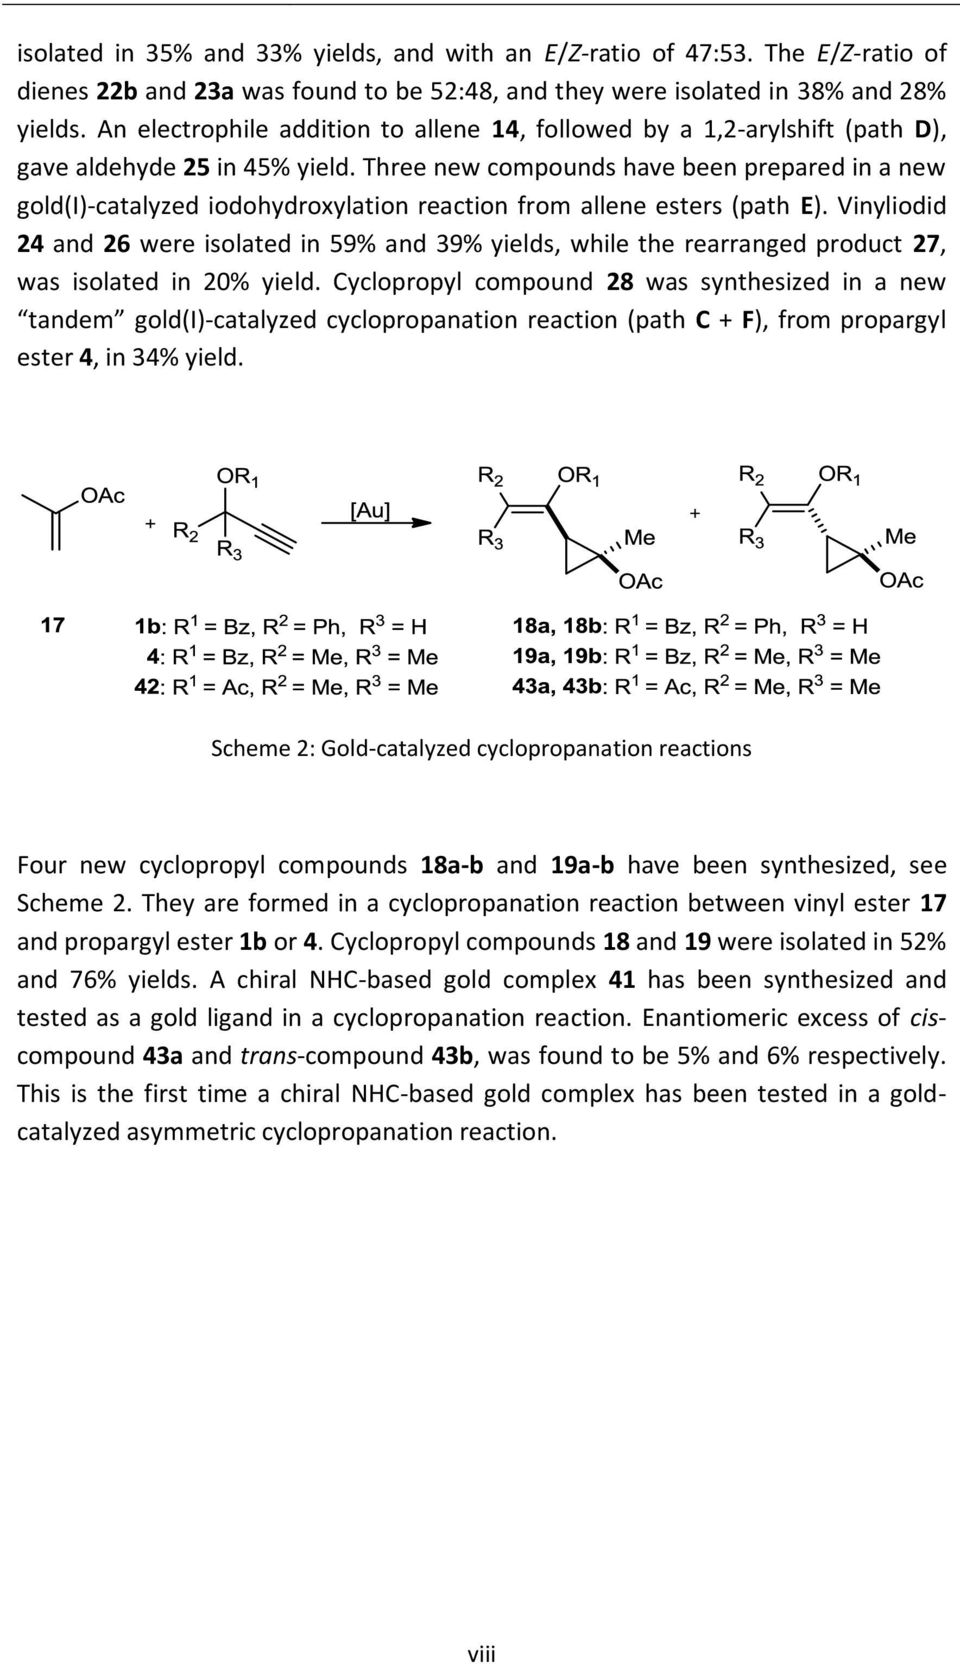 Three new compounds have been prepared in a new gold(i)-catalyzed iodohydroxylation reaction from allene esters (path E).